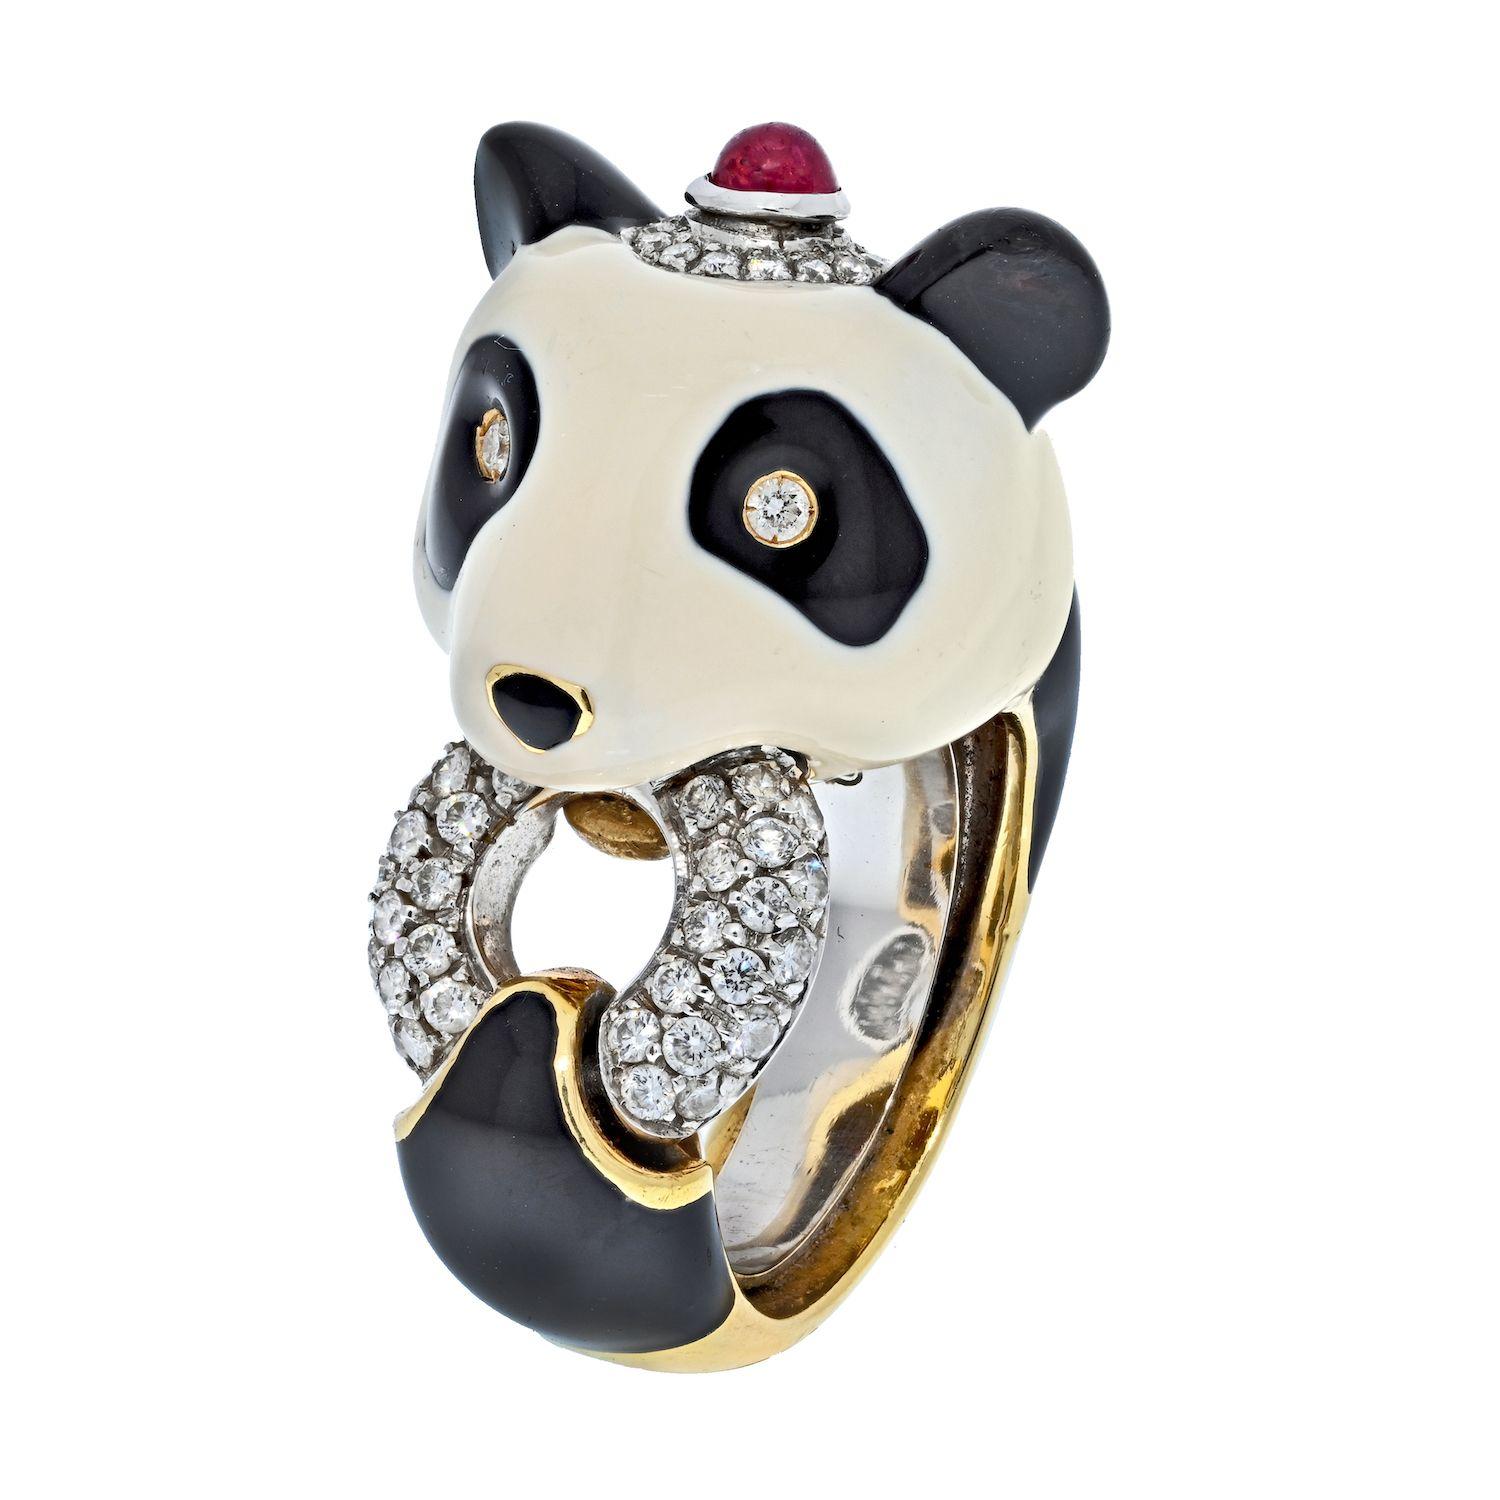 Very cute ring by david Webb. Made in 18kt. gold ring in a form of a Panda Bear in white and black enamel set with diamond eyes and diamond and a ruby cap and diamond connecting ring. Signed WEBB.
David Webb jewelry is characterized by big, bold